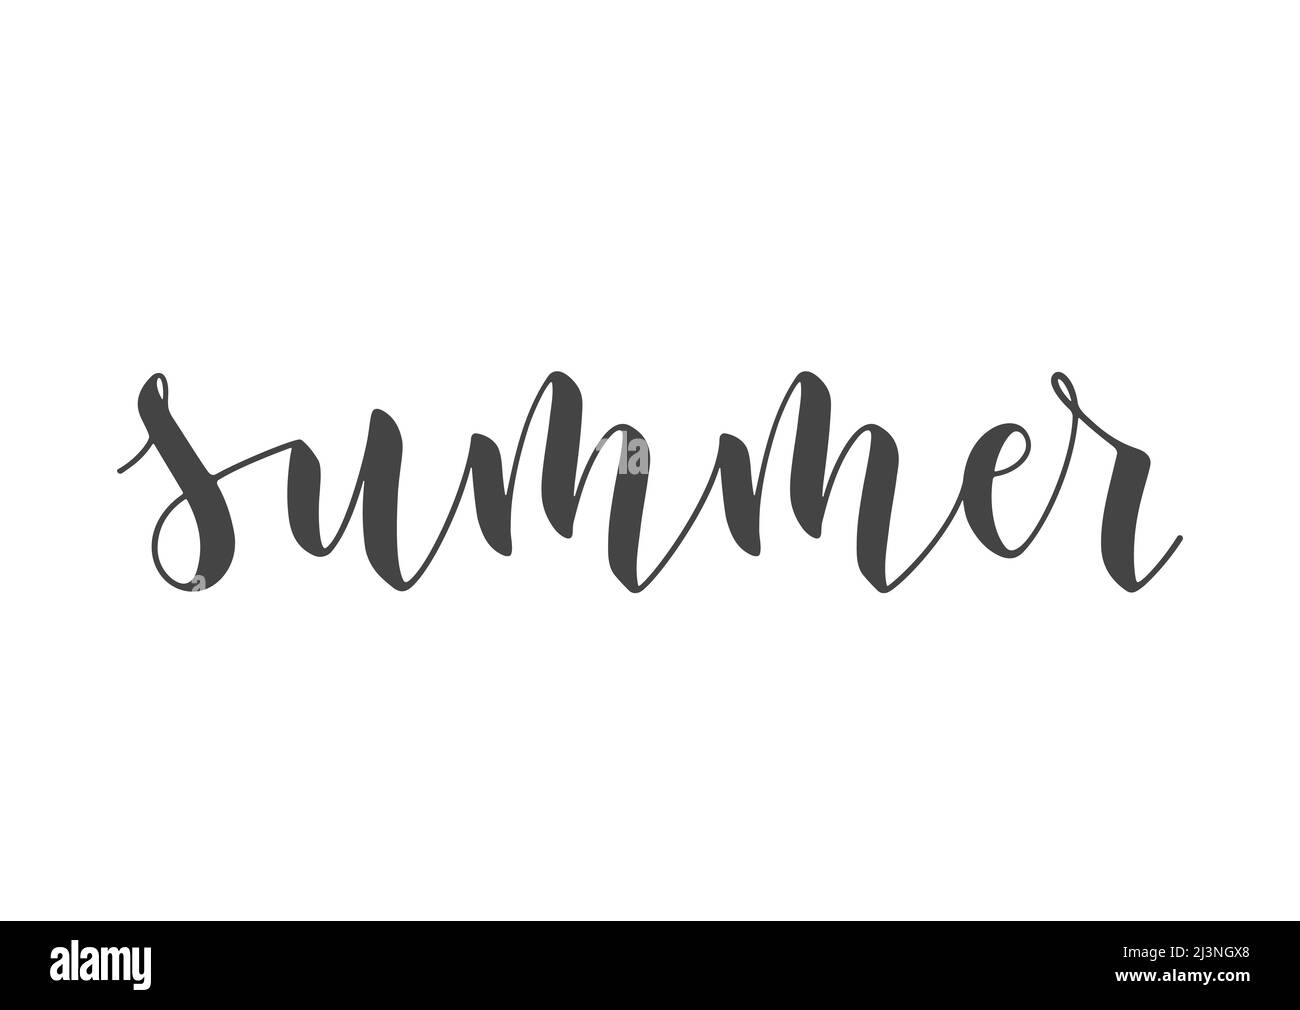 Handwritten Lettering of Summer. Template for Banner, Card, Invitation, Party, Poster, Print or Web Product. Objects Isolated on White Background. Stock Vector